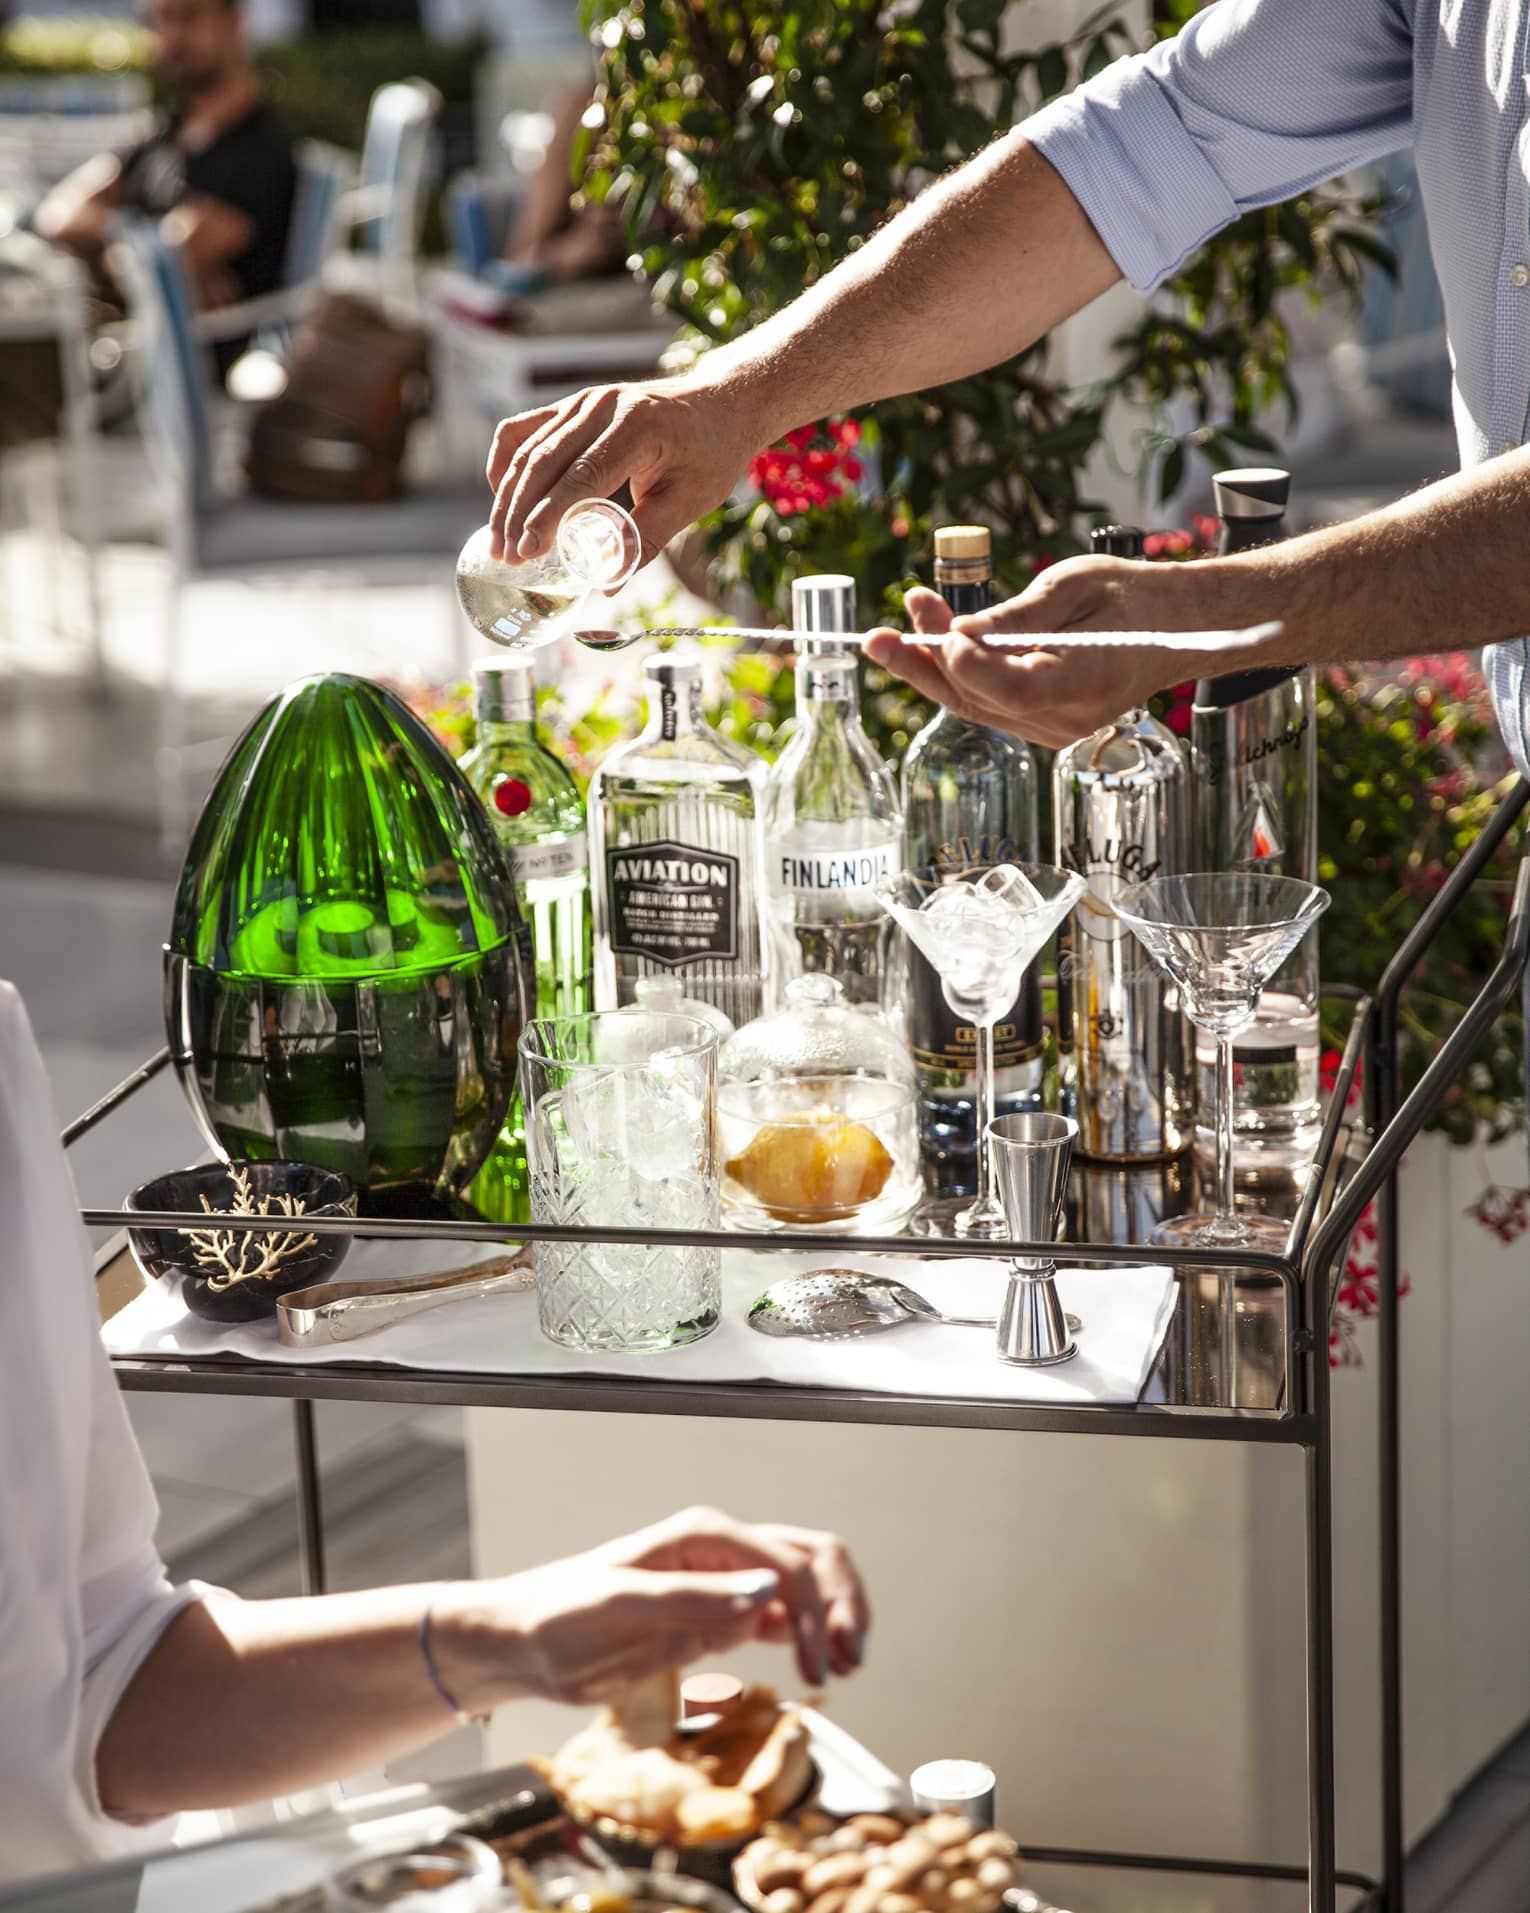 Man pours a drink at outdoor cocktail service cart with various glass bottles